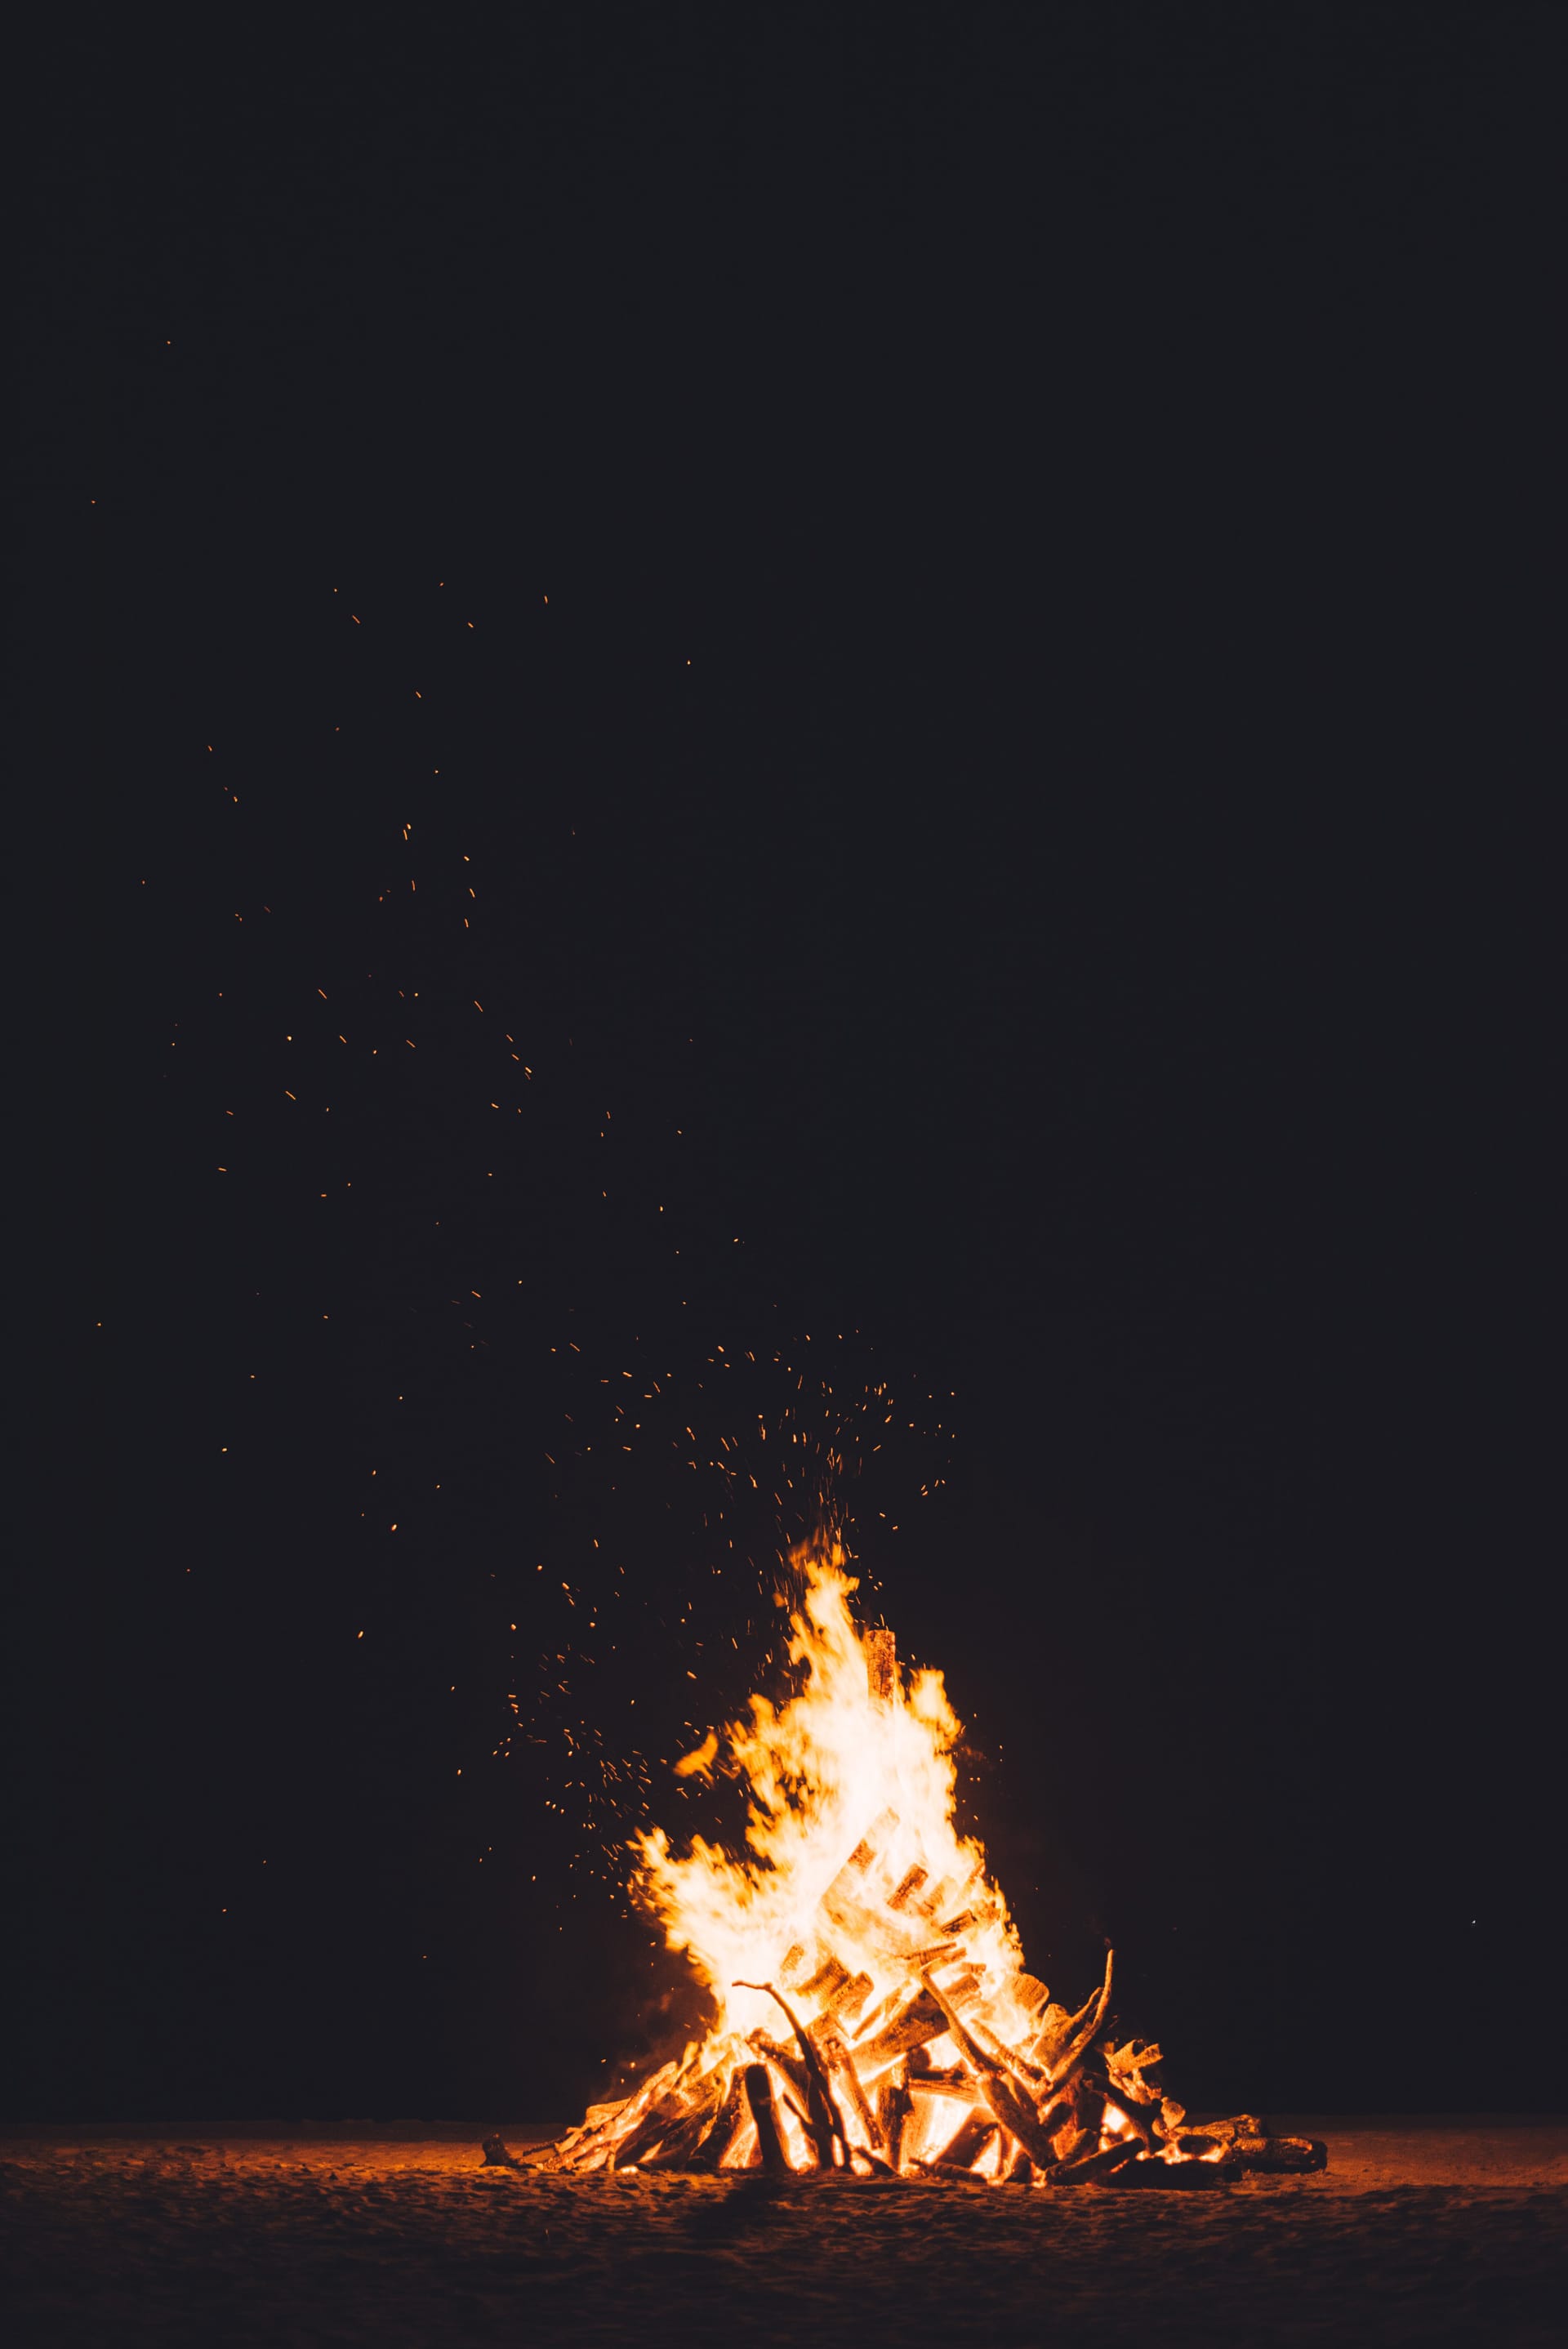 A pile of flames in the darkness background